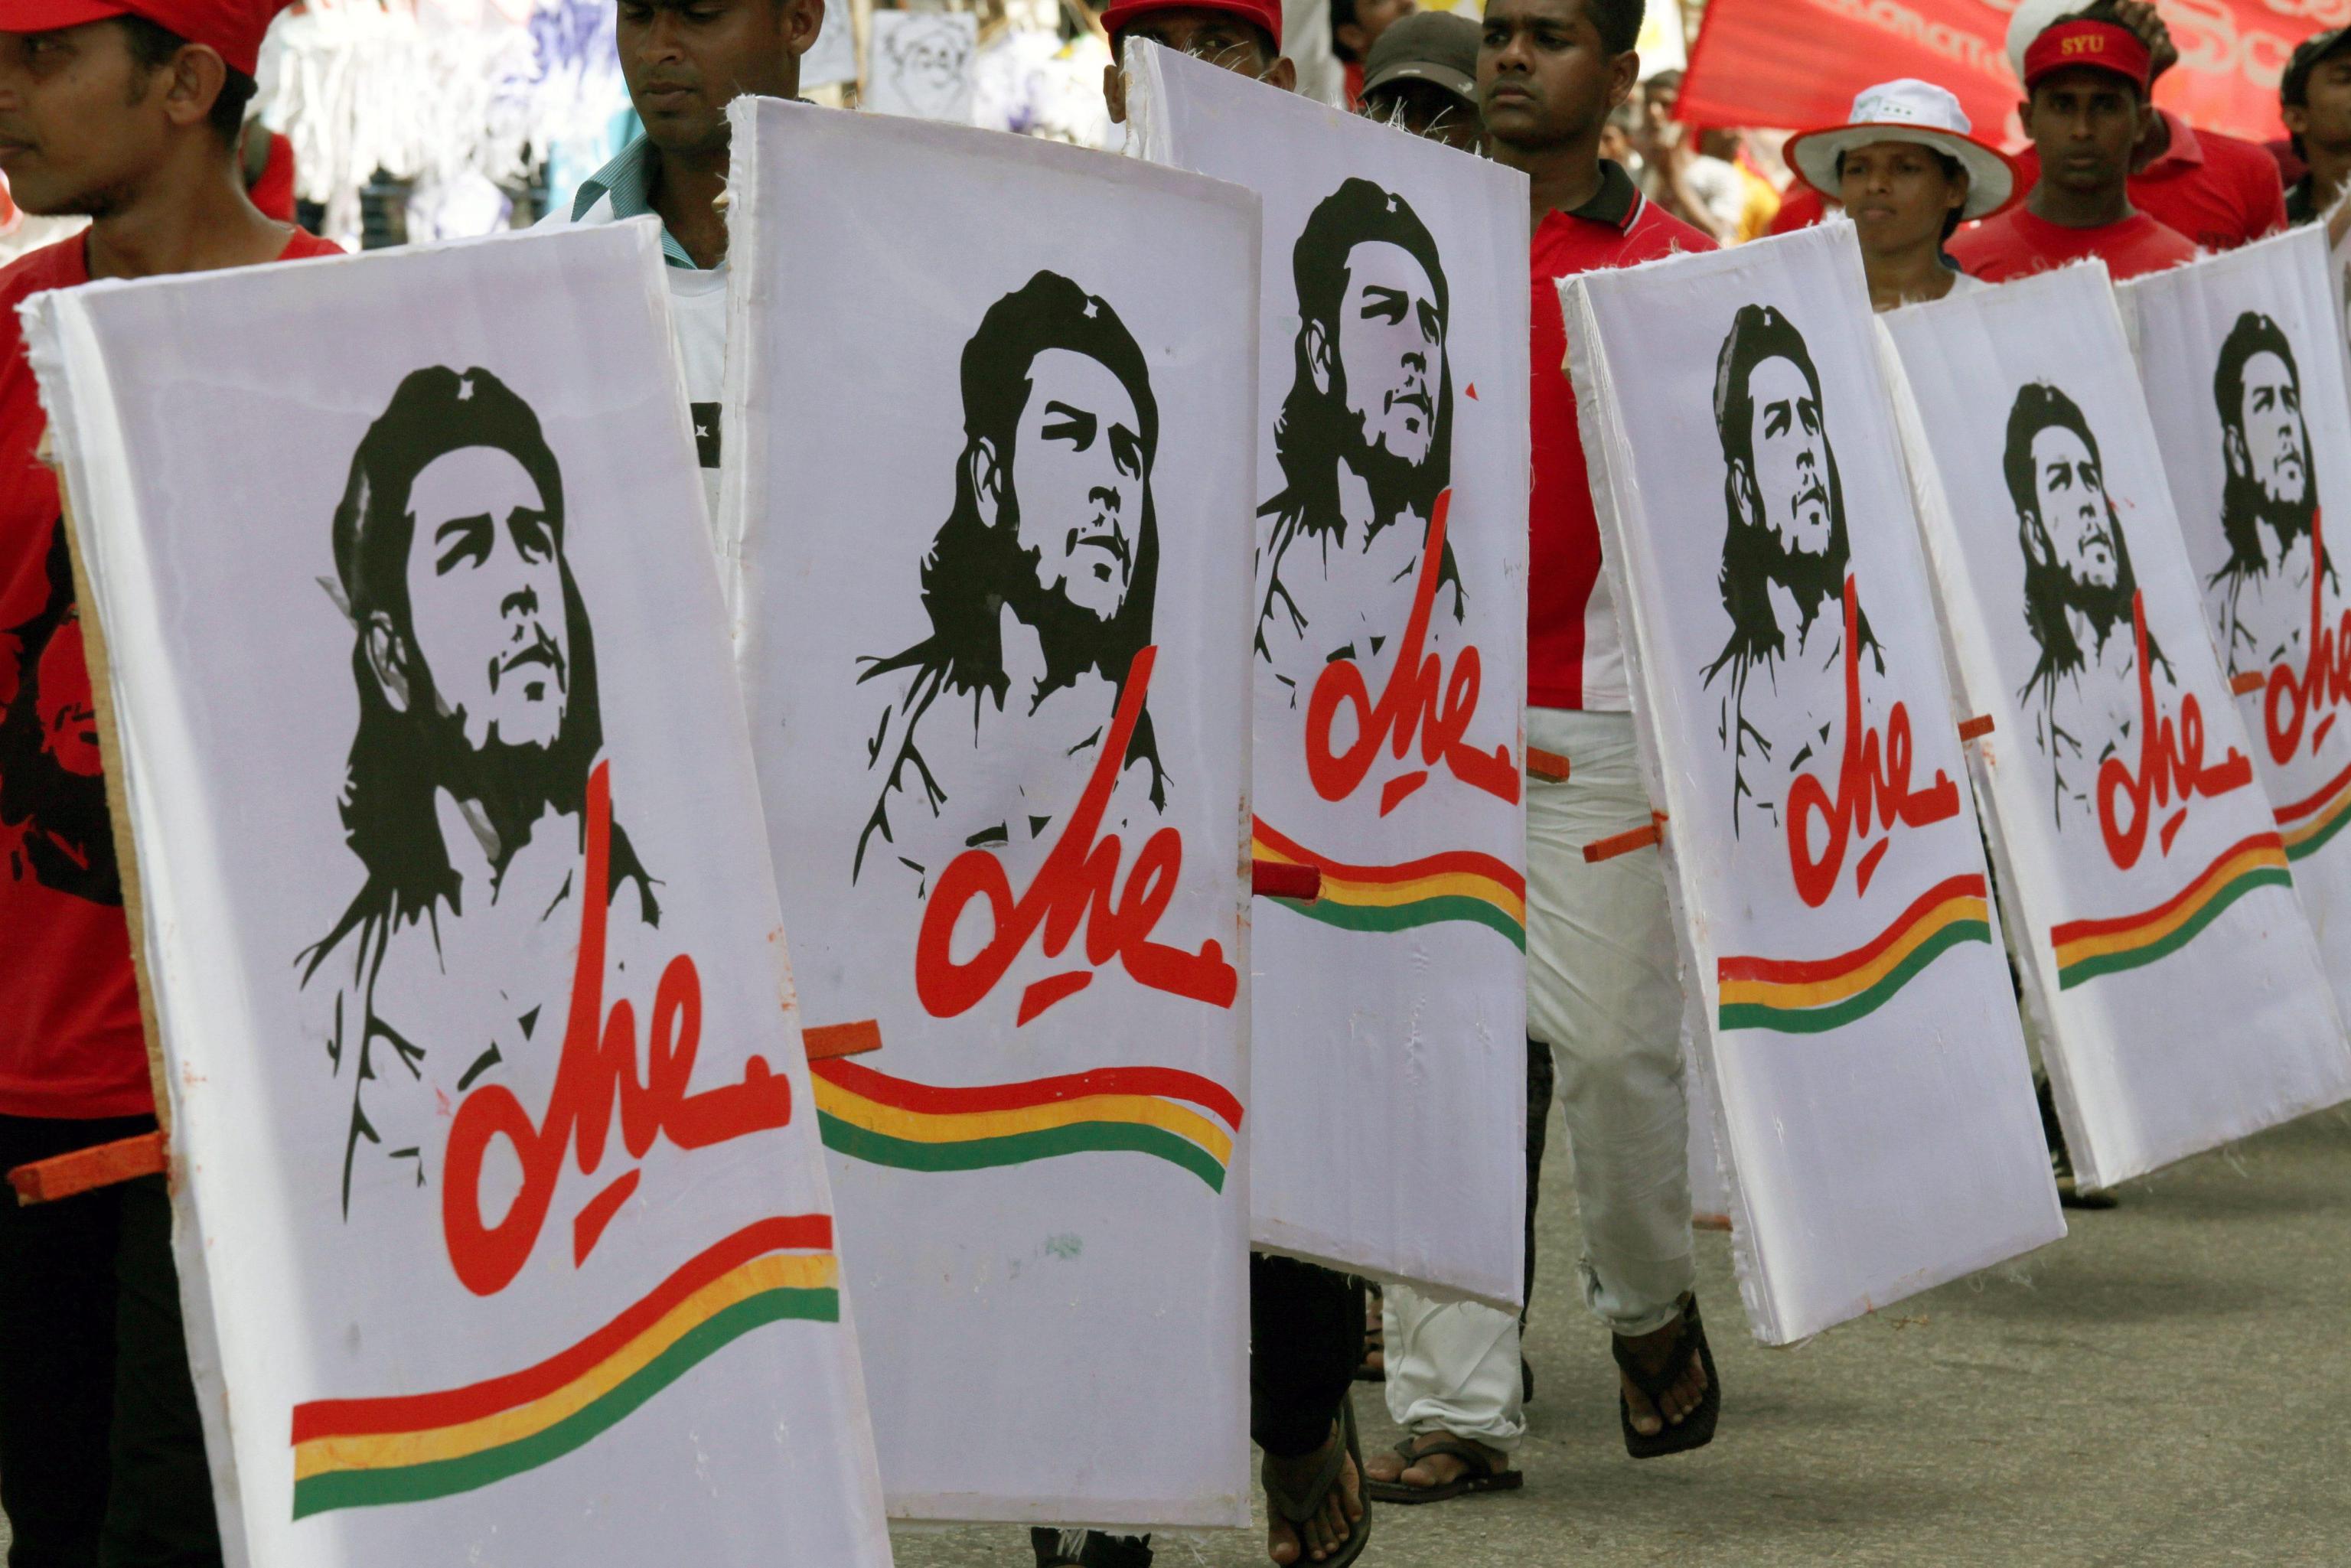 epa03202863 Janatha Vimukthi Peramuna or People's Liberation Front cadres carry portraits of Che Guevara during the May Day parade to the BRC Grounds in Colombo, Sri Lanka, 01 May 2012. Perhaps the only Marxist party in the island nation, the Janatha Vimukthi Peramuna or People's Liberation Front founded by Rohana Wijeweera who was killed after his second failed rebellion during 1988-89 has been in and out of governments after it entered mainstream politics. It suffered a split recently which gave birth to another political entity the Frontline Socialist Party.  EPA/M.A.PUSHPA KUMARA